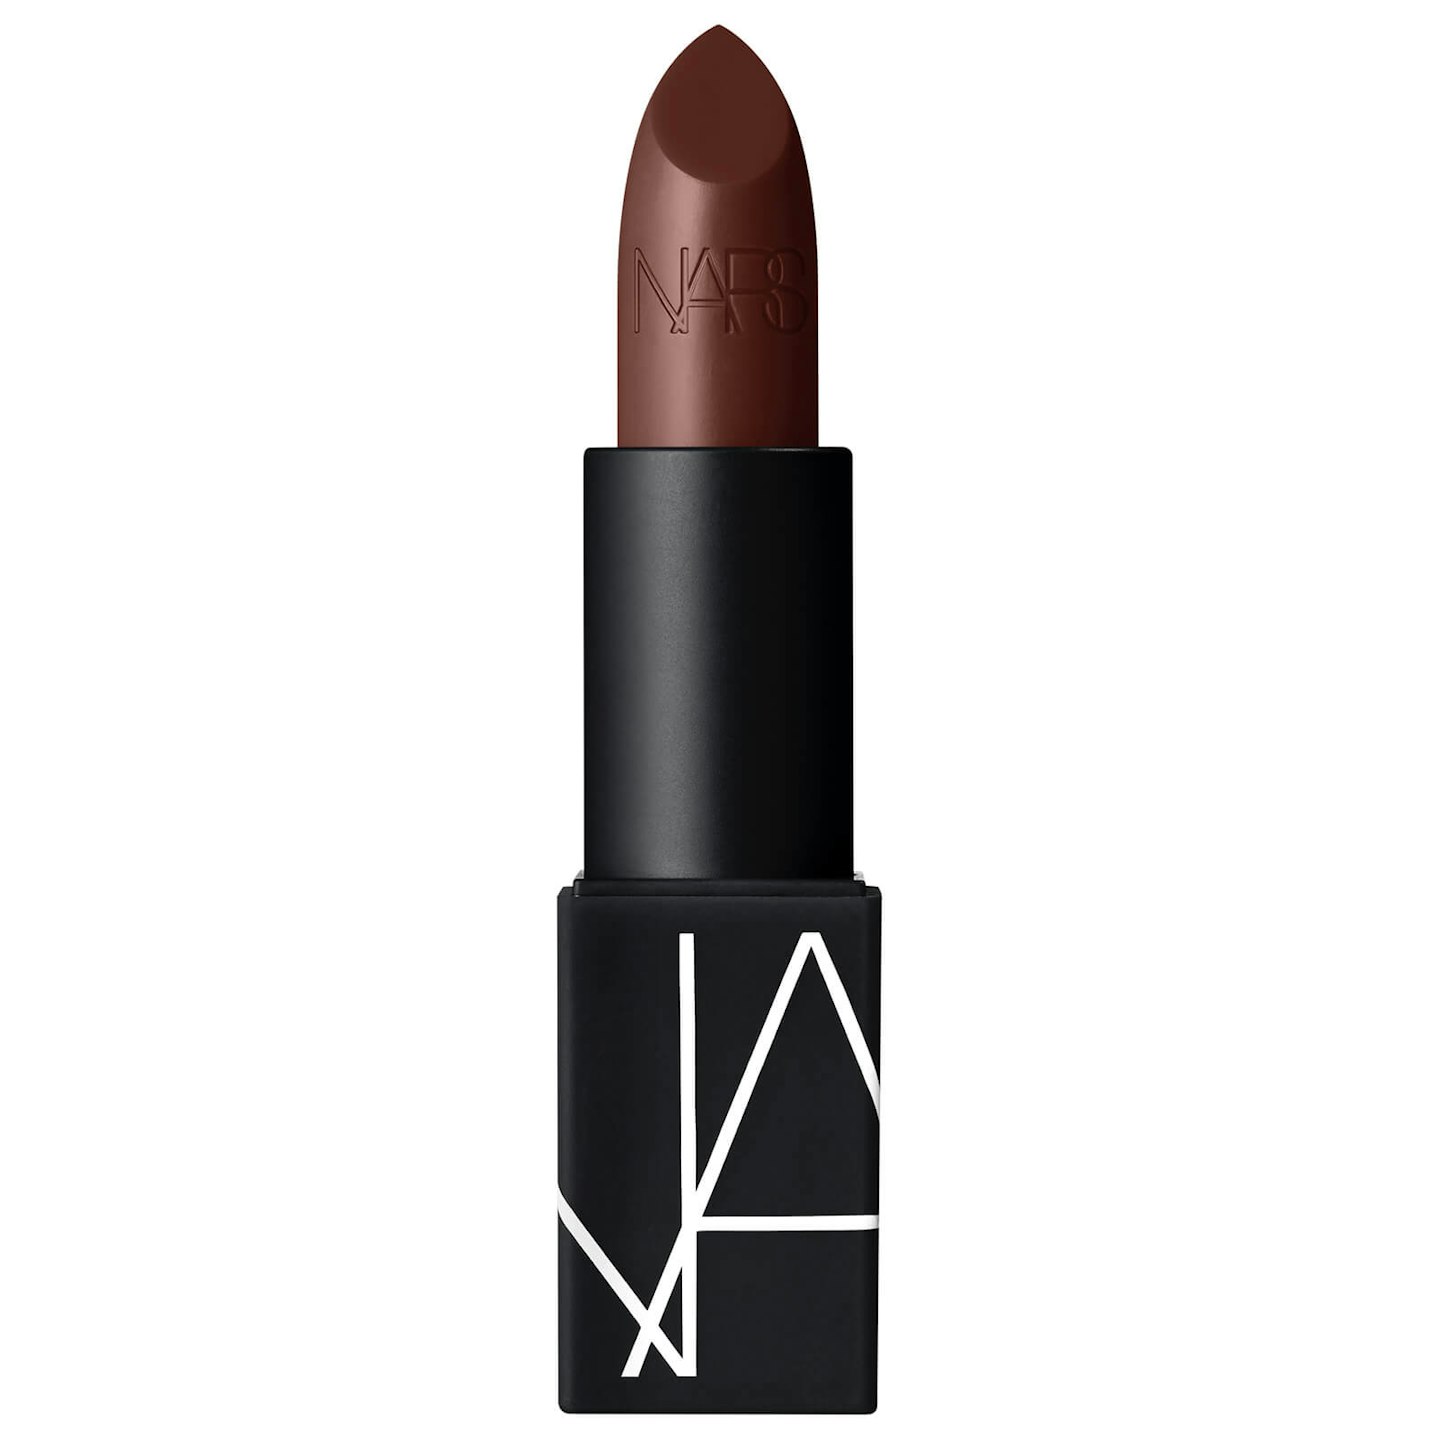 Look 1: Why Not Try - NARS Sensual Satin Lipstick in Opulent Red, £22